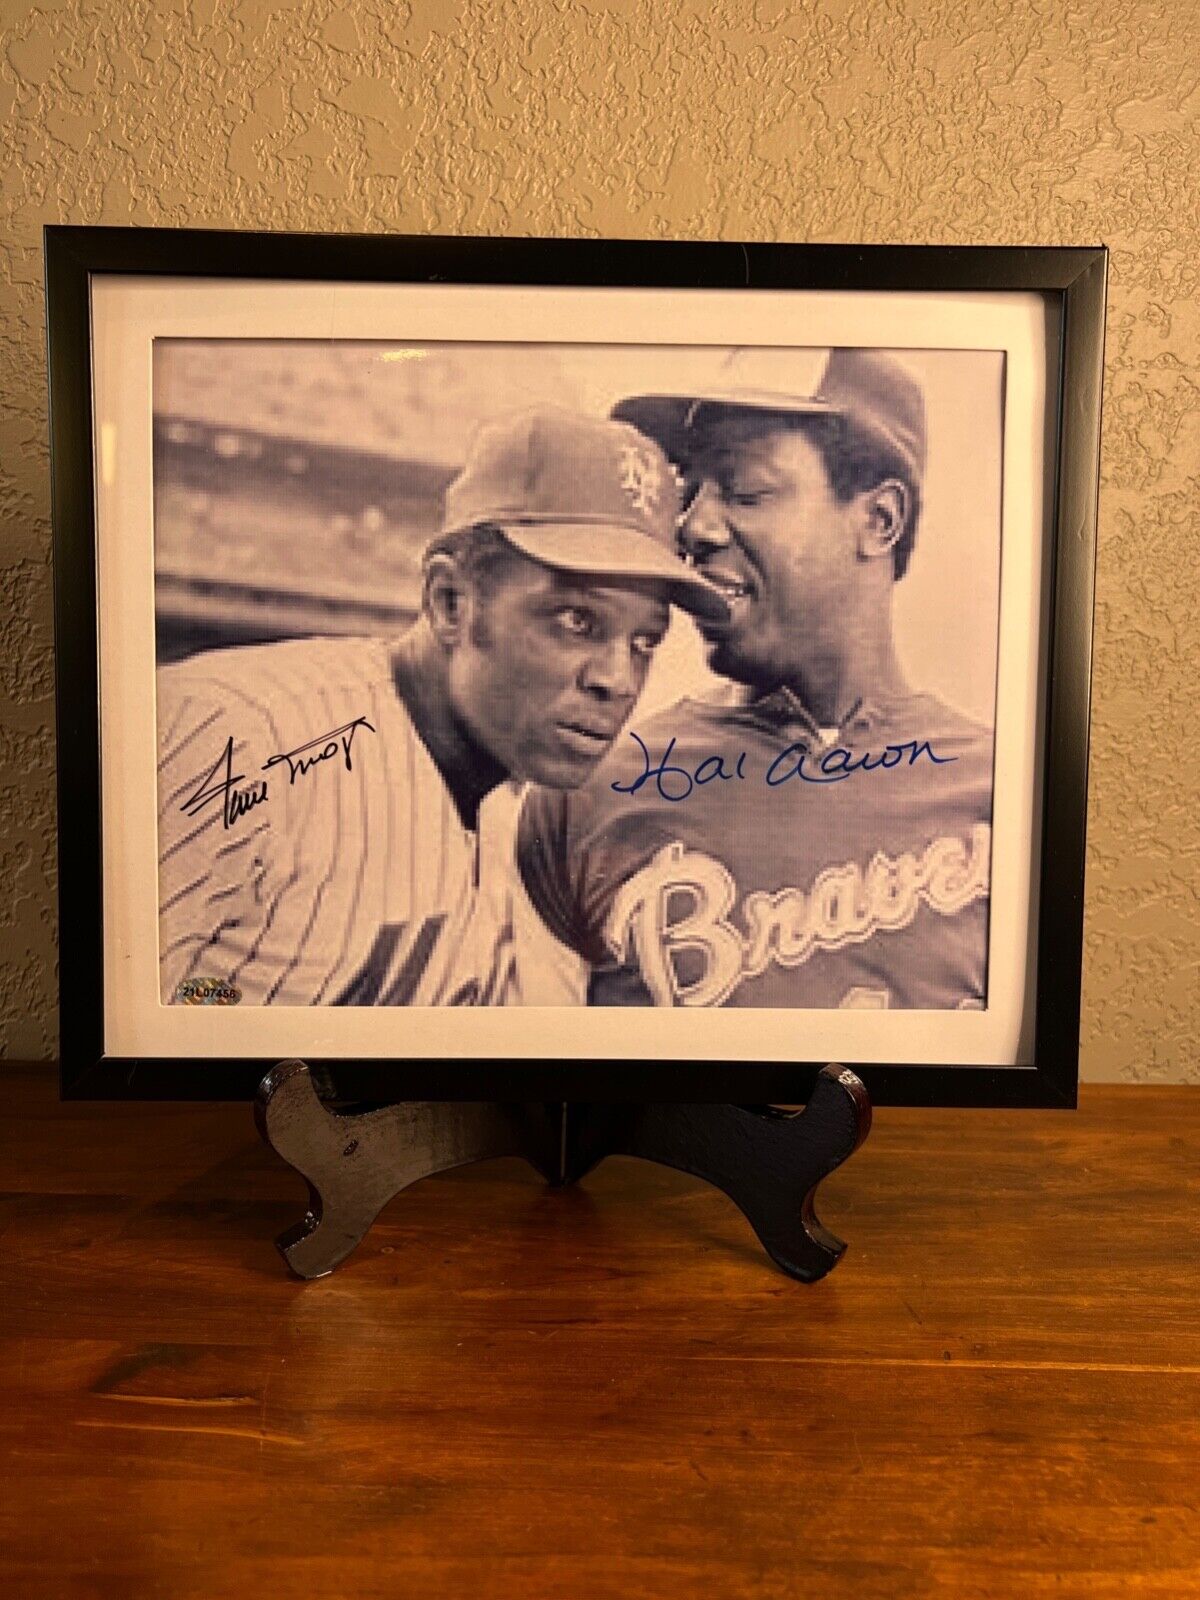 Willie Mays and Hank Aaron Autographed Photo